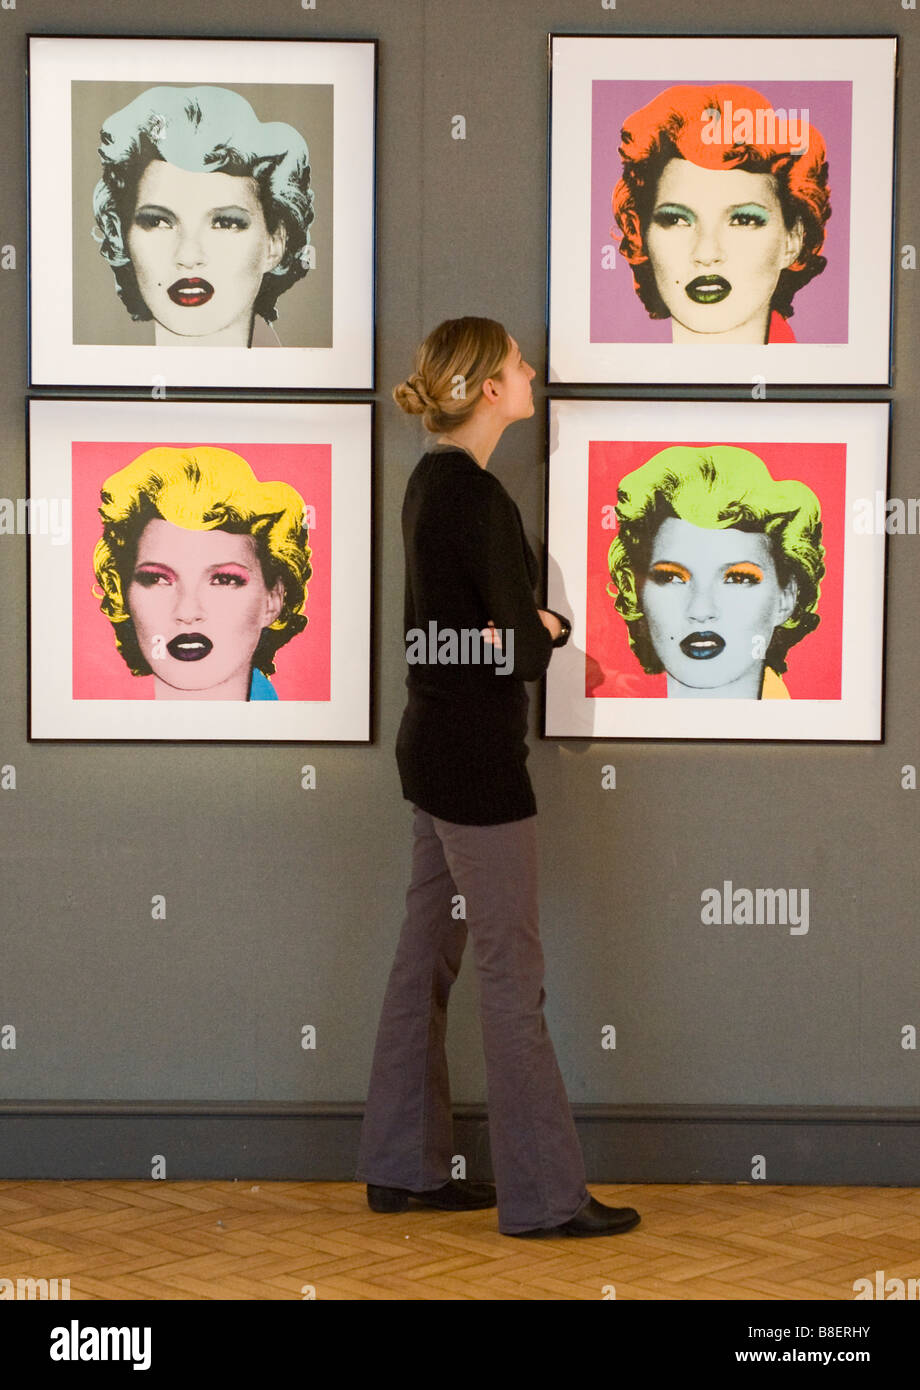 Prints of model Kate Moss by artist Banksy  inspired by Andy Warhol's iconic image of Marilyn Monroe, at Bonham's London Stock Photo